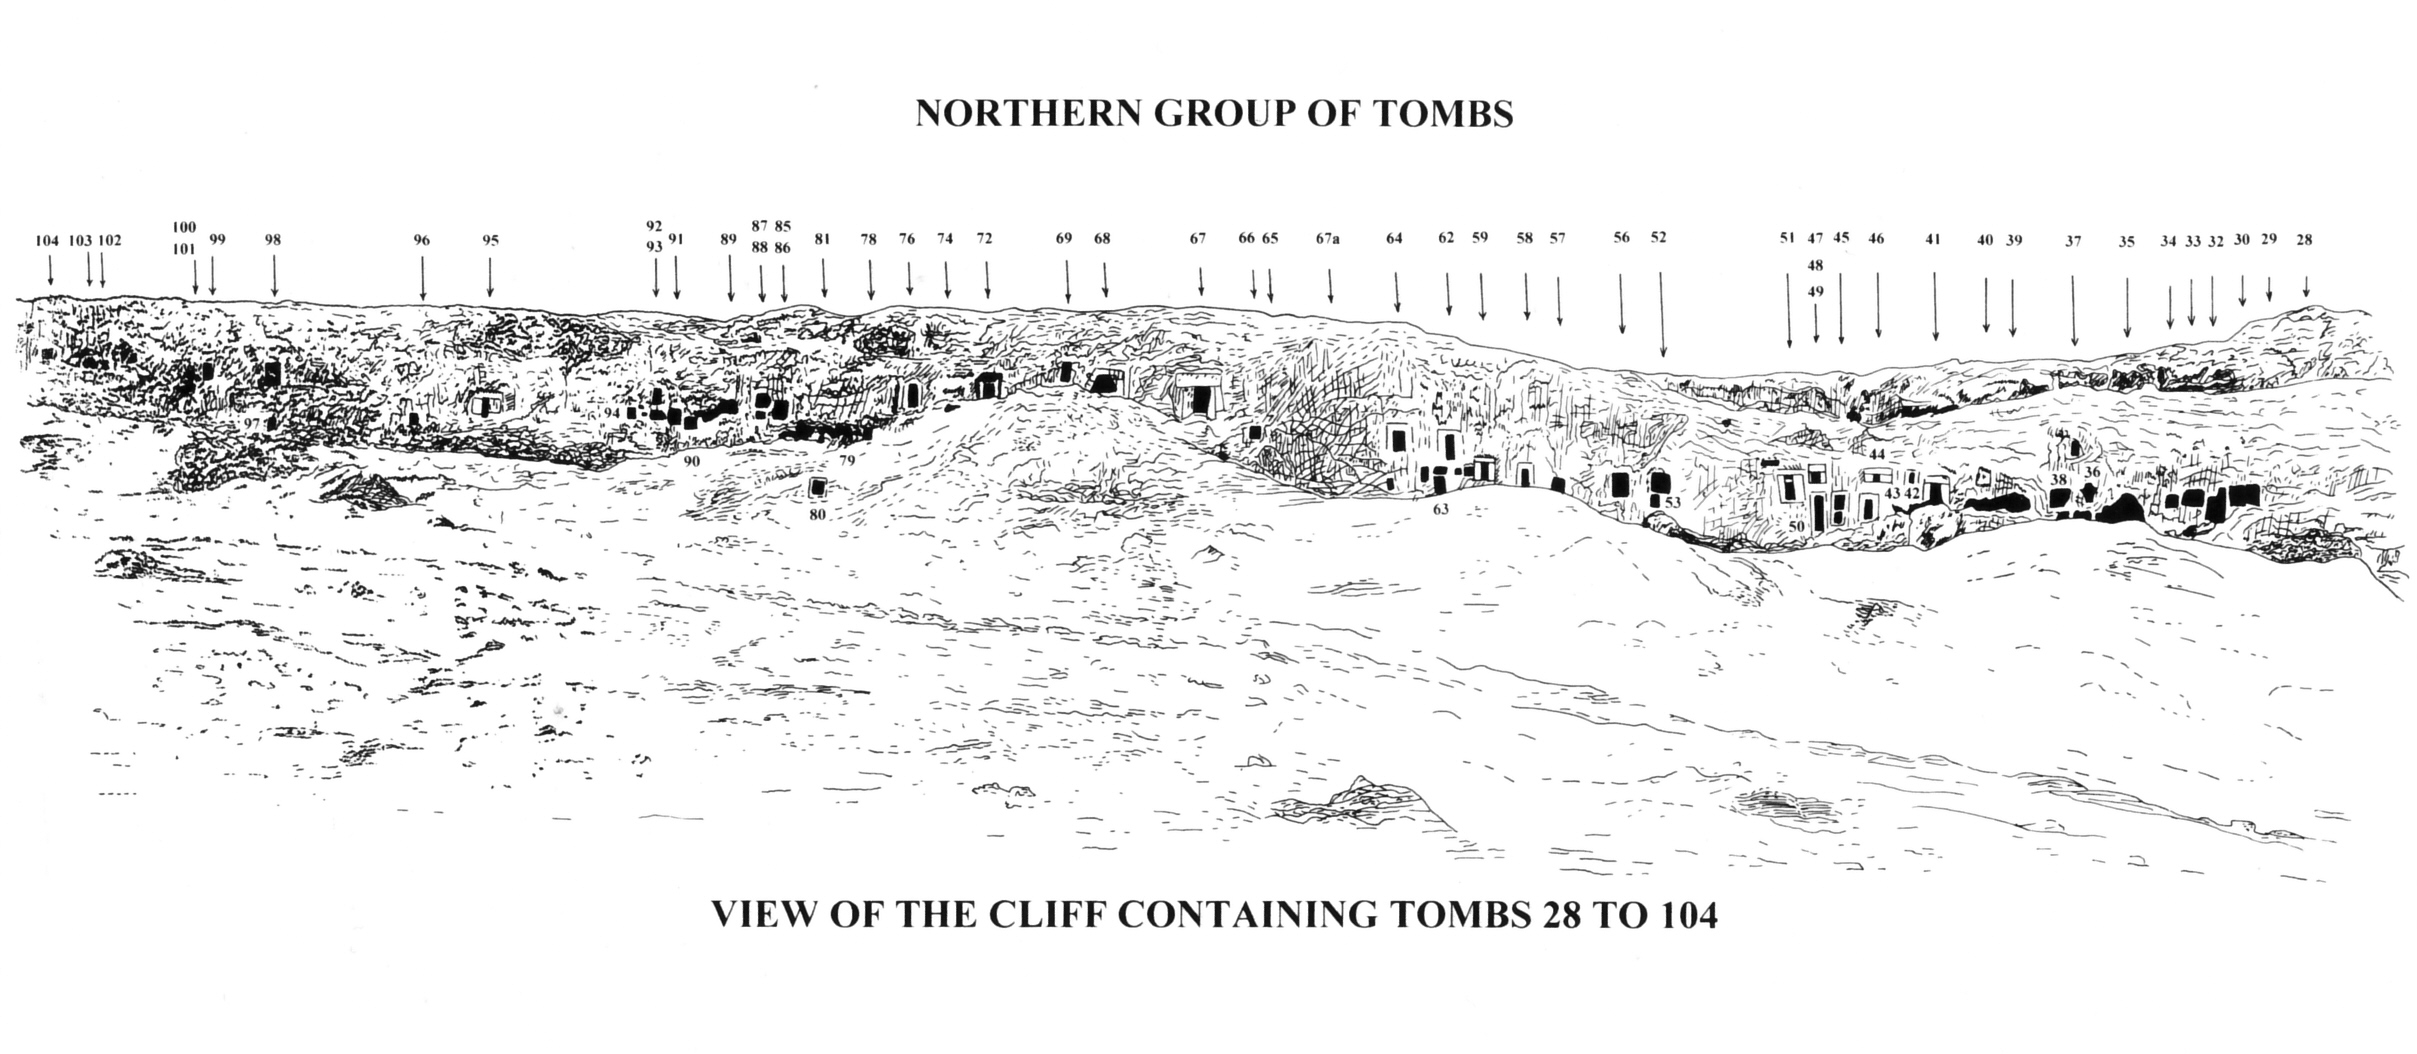 Norman de Garis Davies, ''Northern group of tombs, view of a cliff containing tomb numbers 28 to 104,'' [[Deir el-Gabrawi